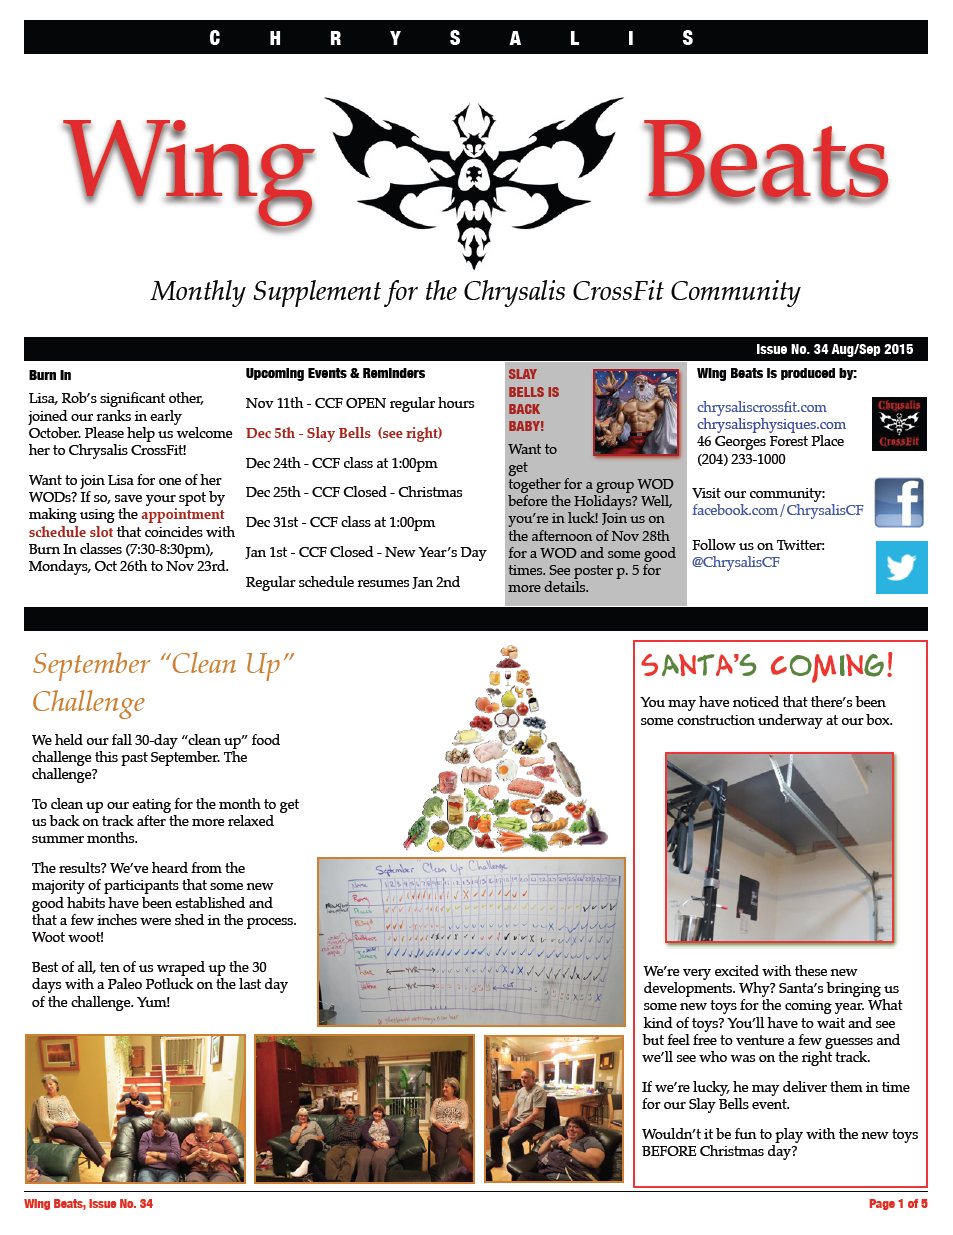 WingBeats Issue #34 - AugSep 2015